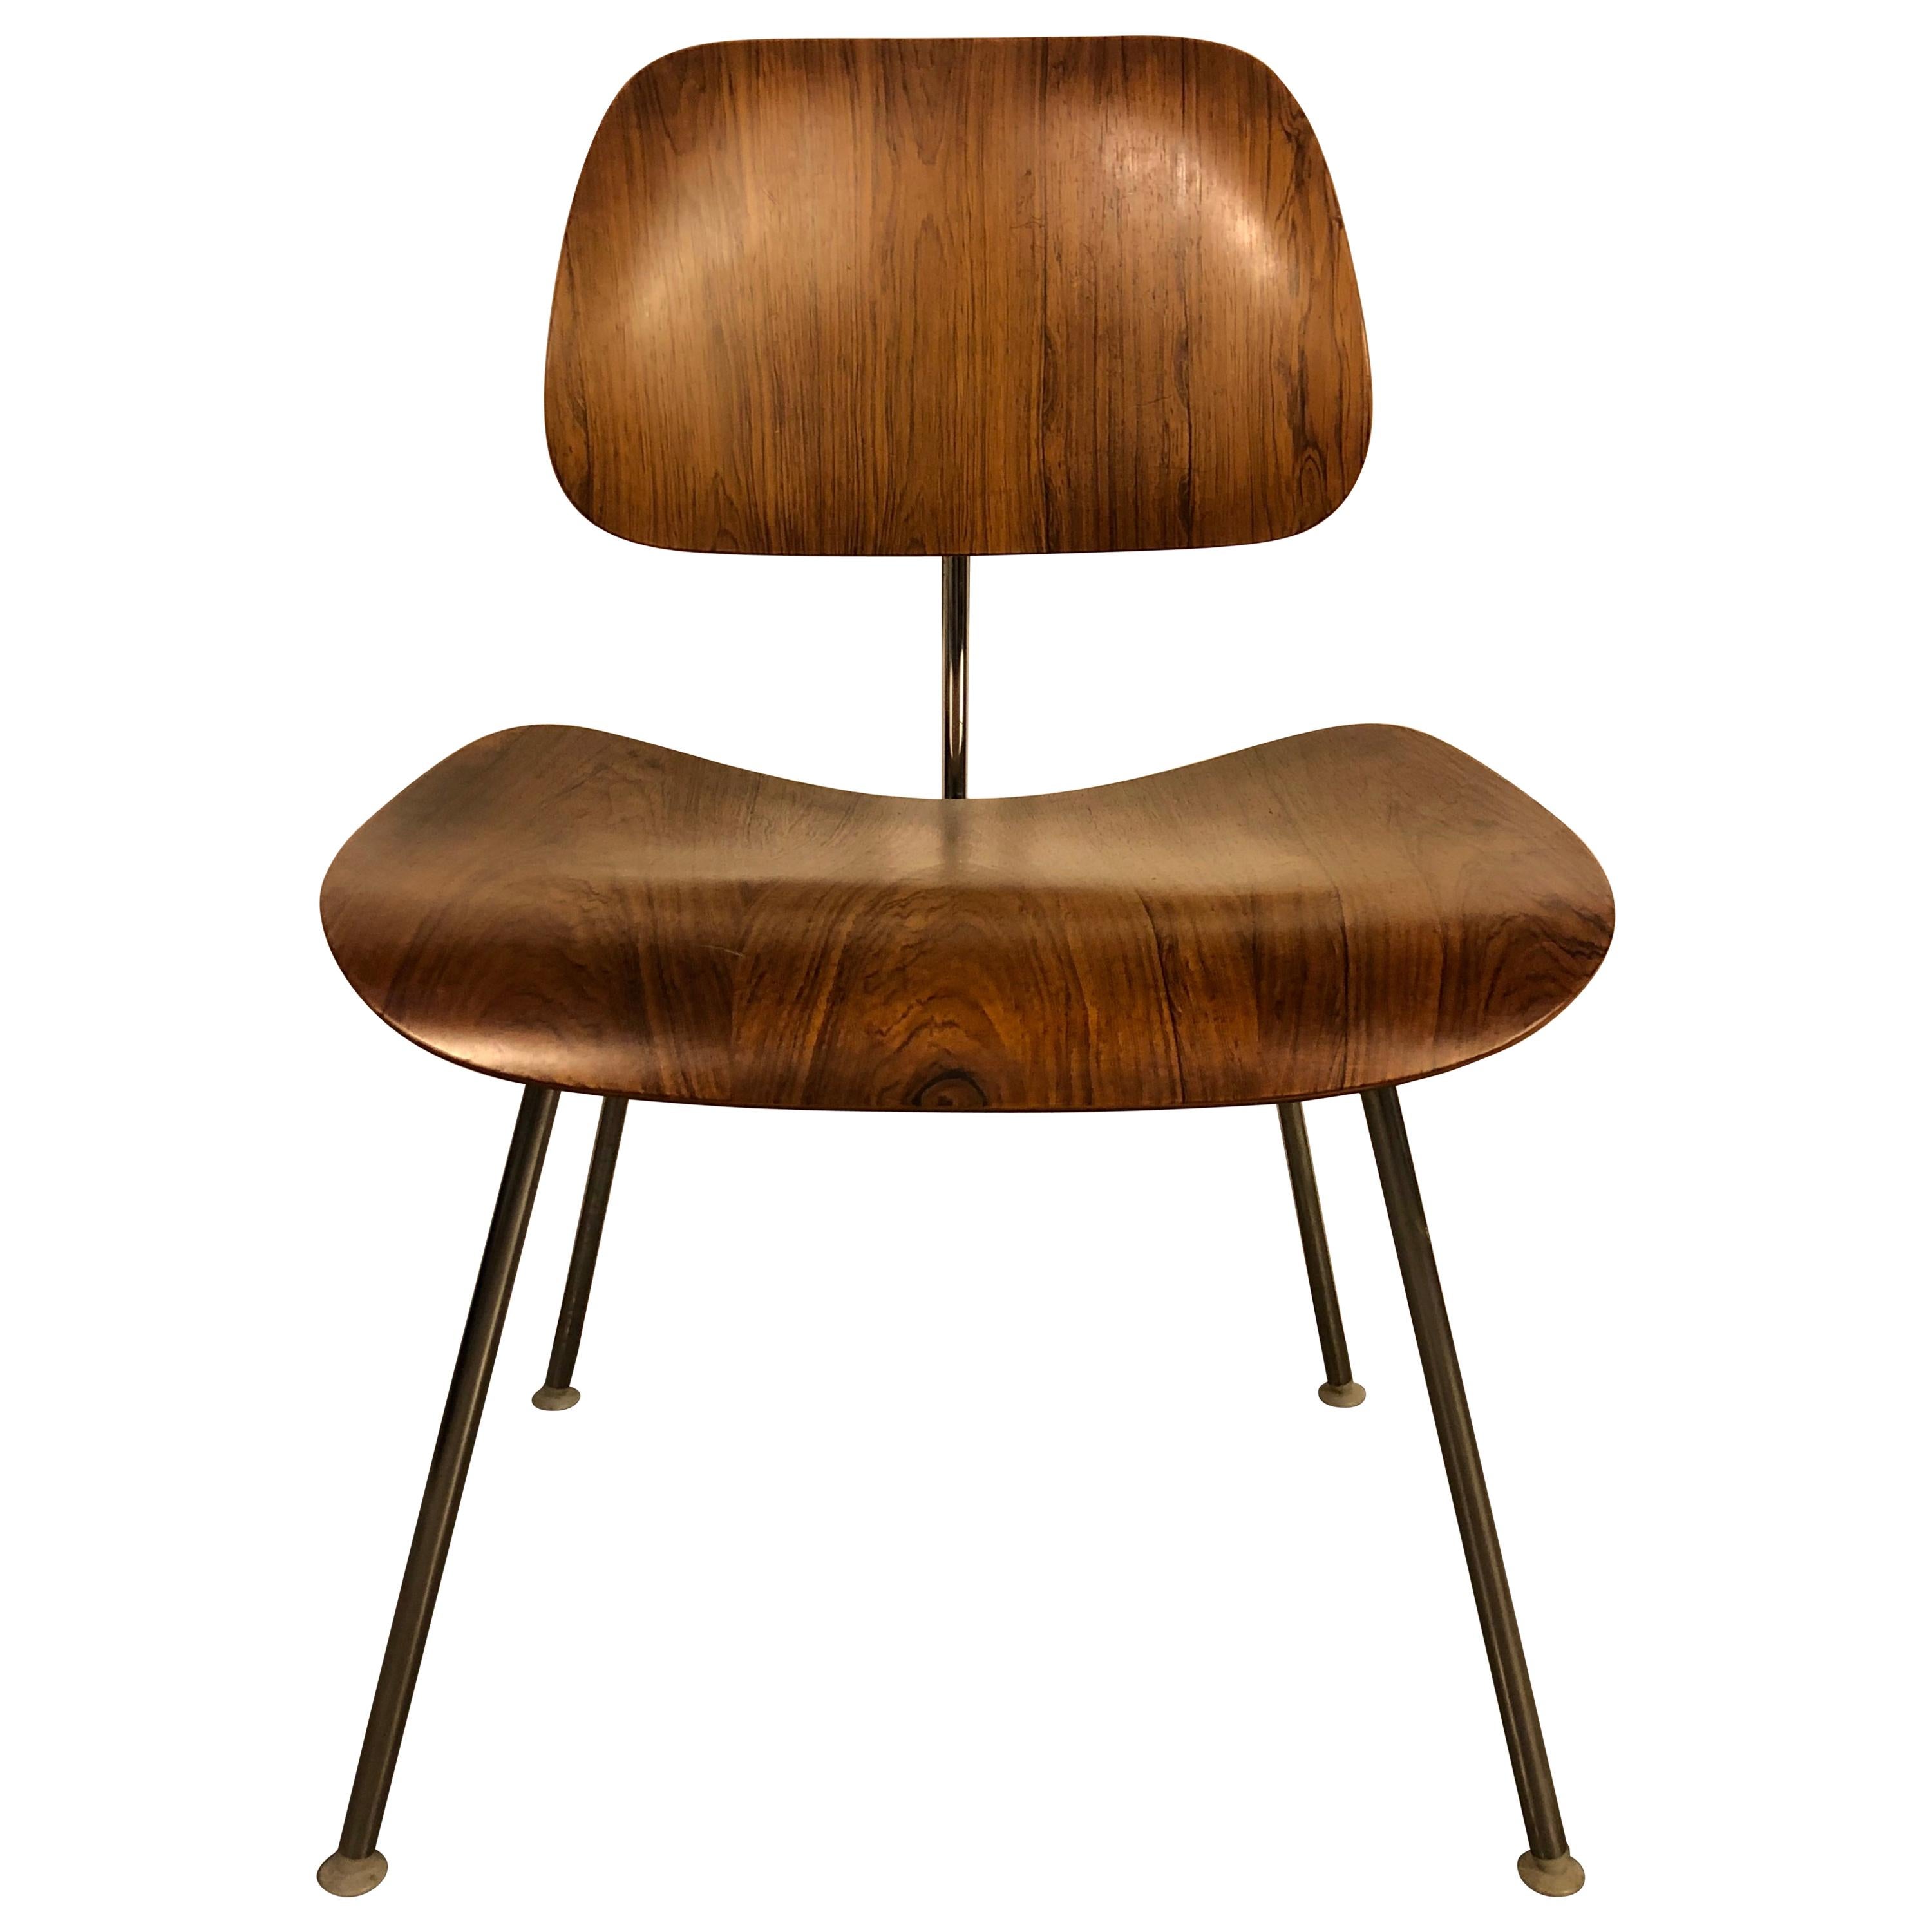 Gorgeous set of original Eames for Herman Miller DCM dining chairs in rosewood. All chairs signed. Rosewood was a special order option and it is extremely rare to find more than 1-2 at a time, and especially an original set. Wonderful and rich